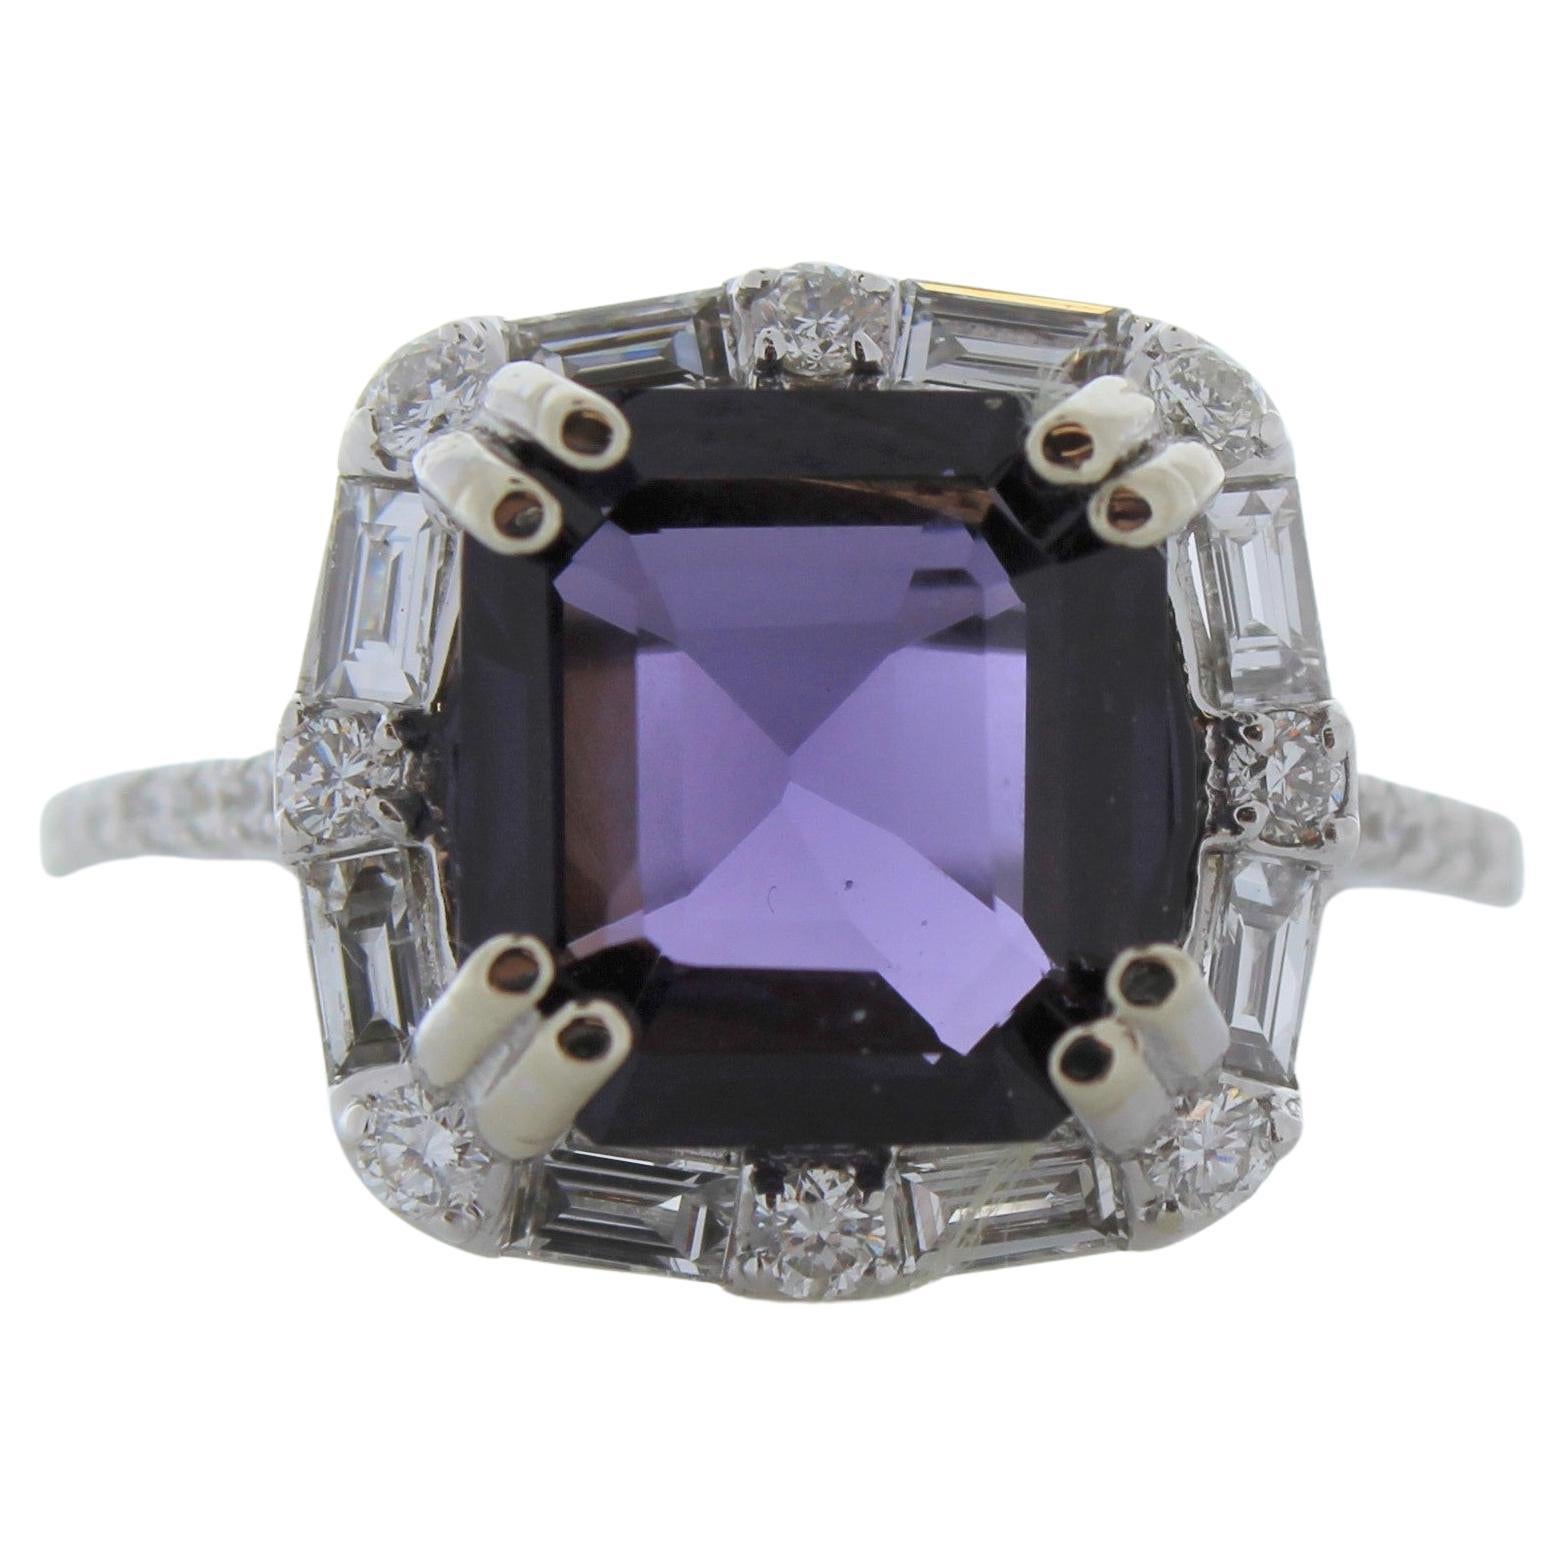 4.45 Carat Cushion Purple Spinel and Diamond Ring in 14K White Gold